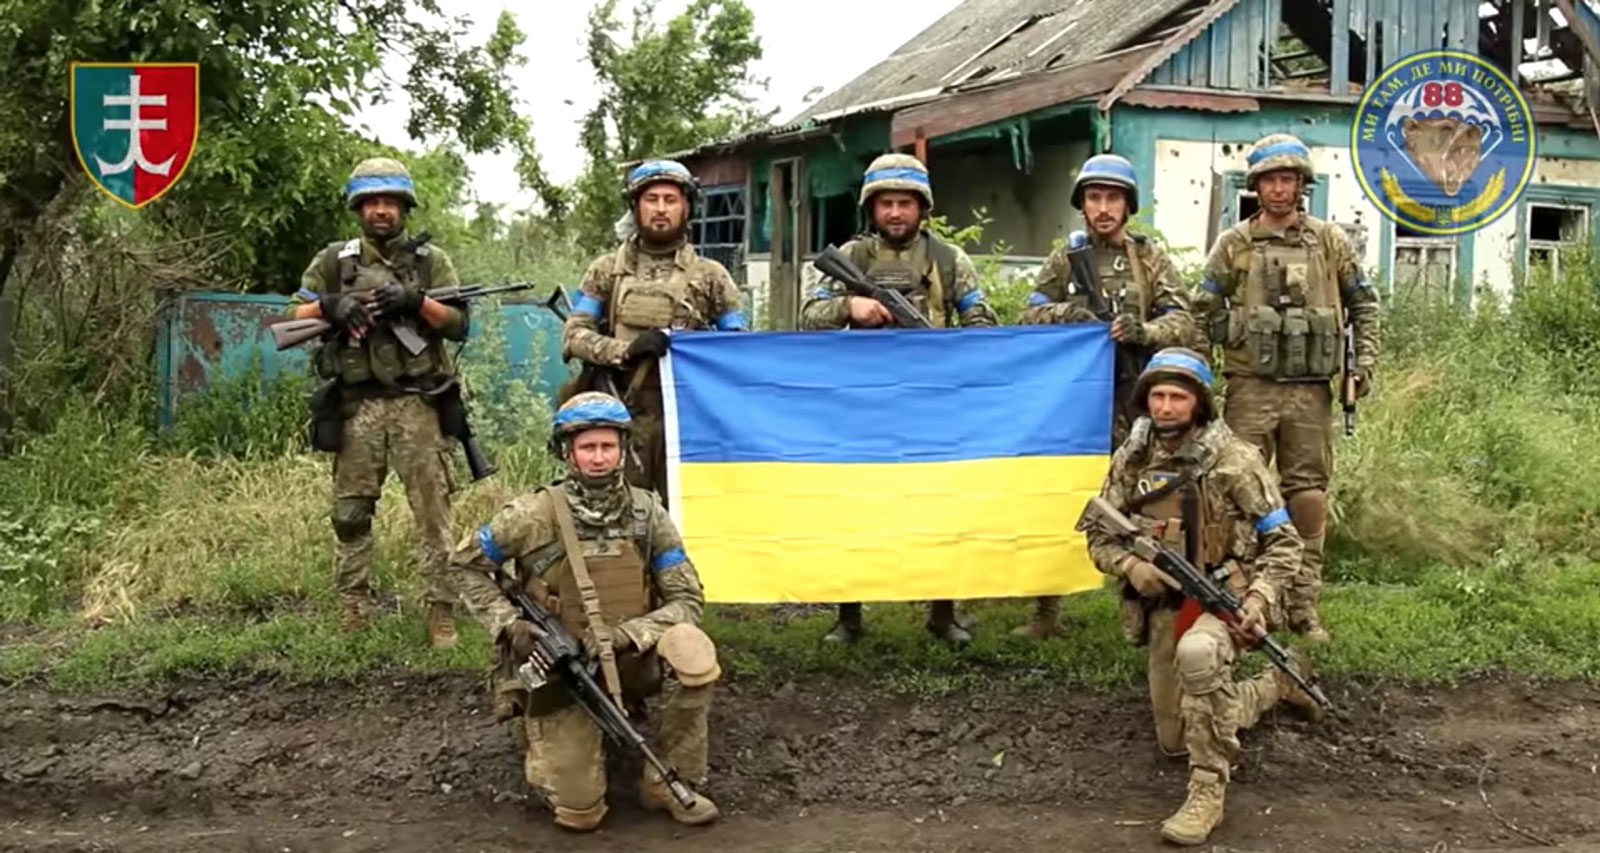 A frame from a video purportedly showing Ukrainian soldiers after retaking the village of Storozheve in the Donetsk region, Ukraine, on June 12.